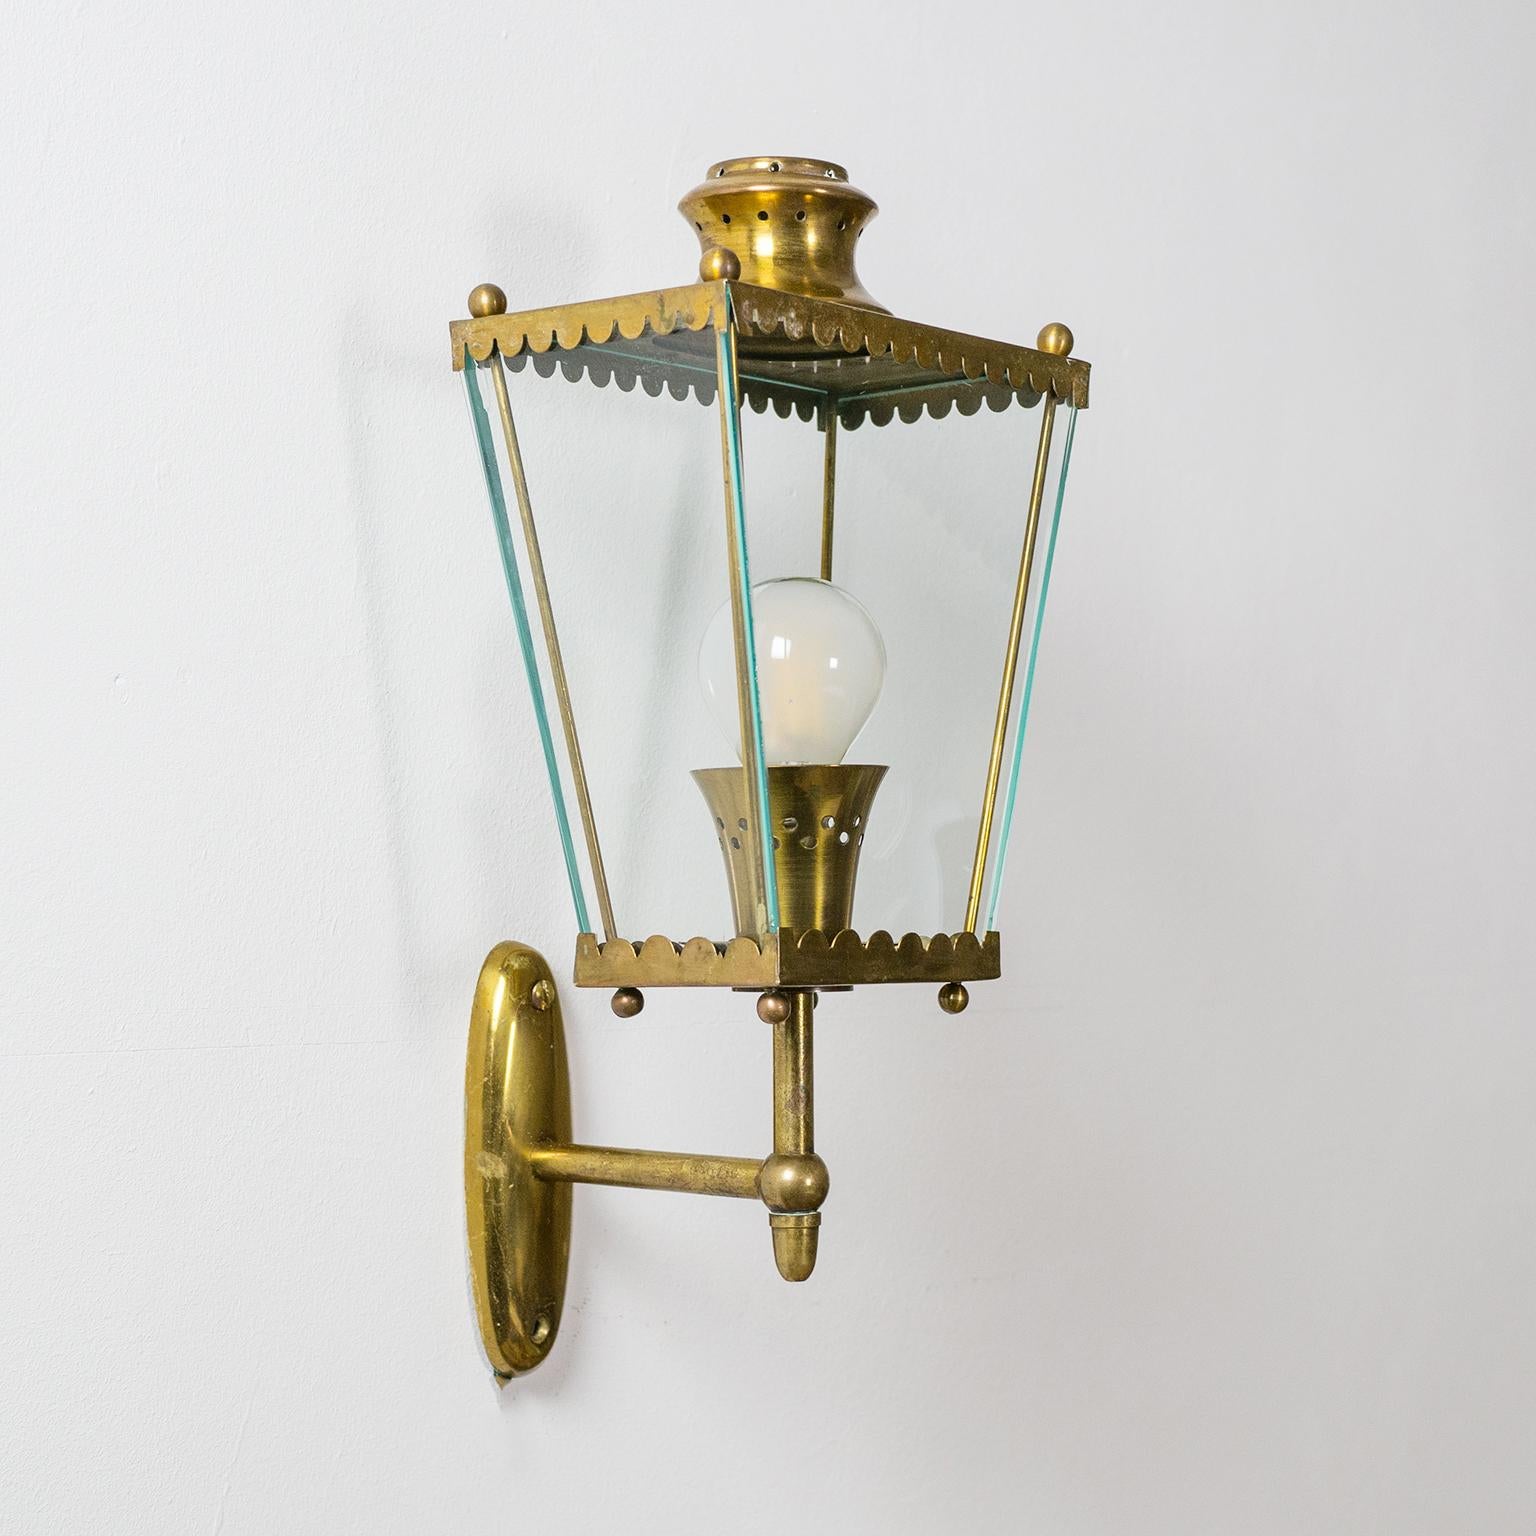 Charming Italian lantern-style wall light from the 1940s. Intricate brass hardware with four sheets of glass. Good condition with patina on the brass and small chips to the glass. One original brass E14 socket with new wiring.